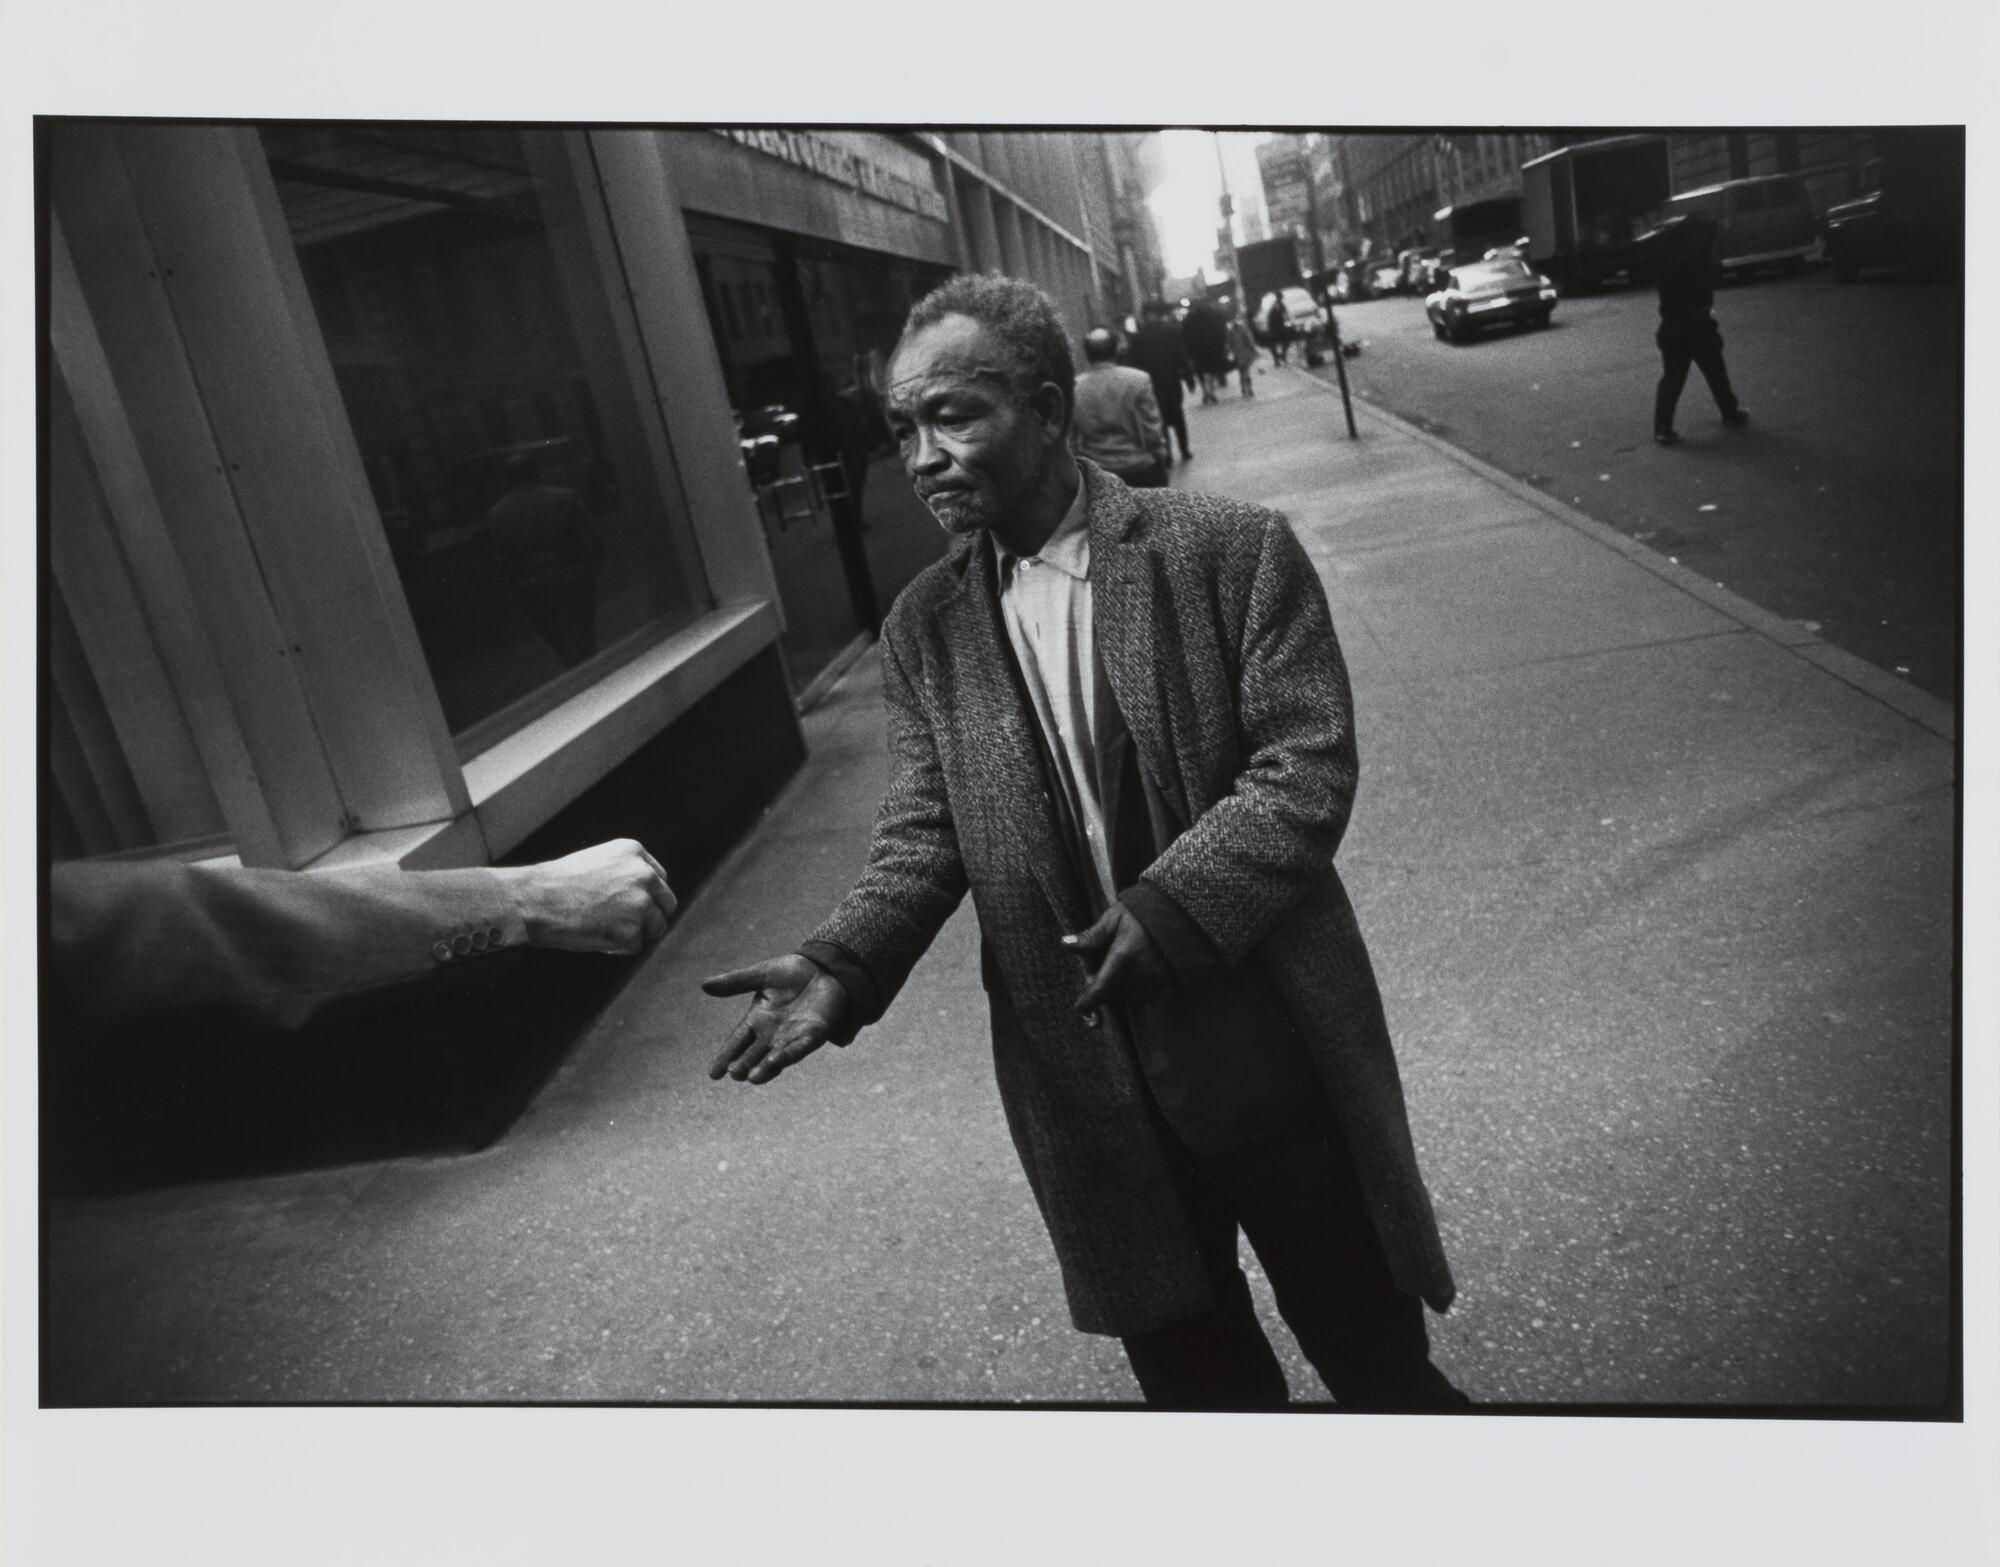 This photograph depicts a view of a man accepting a coin from a passerby on a city sidewalk. 